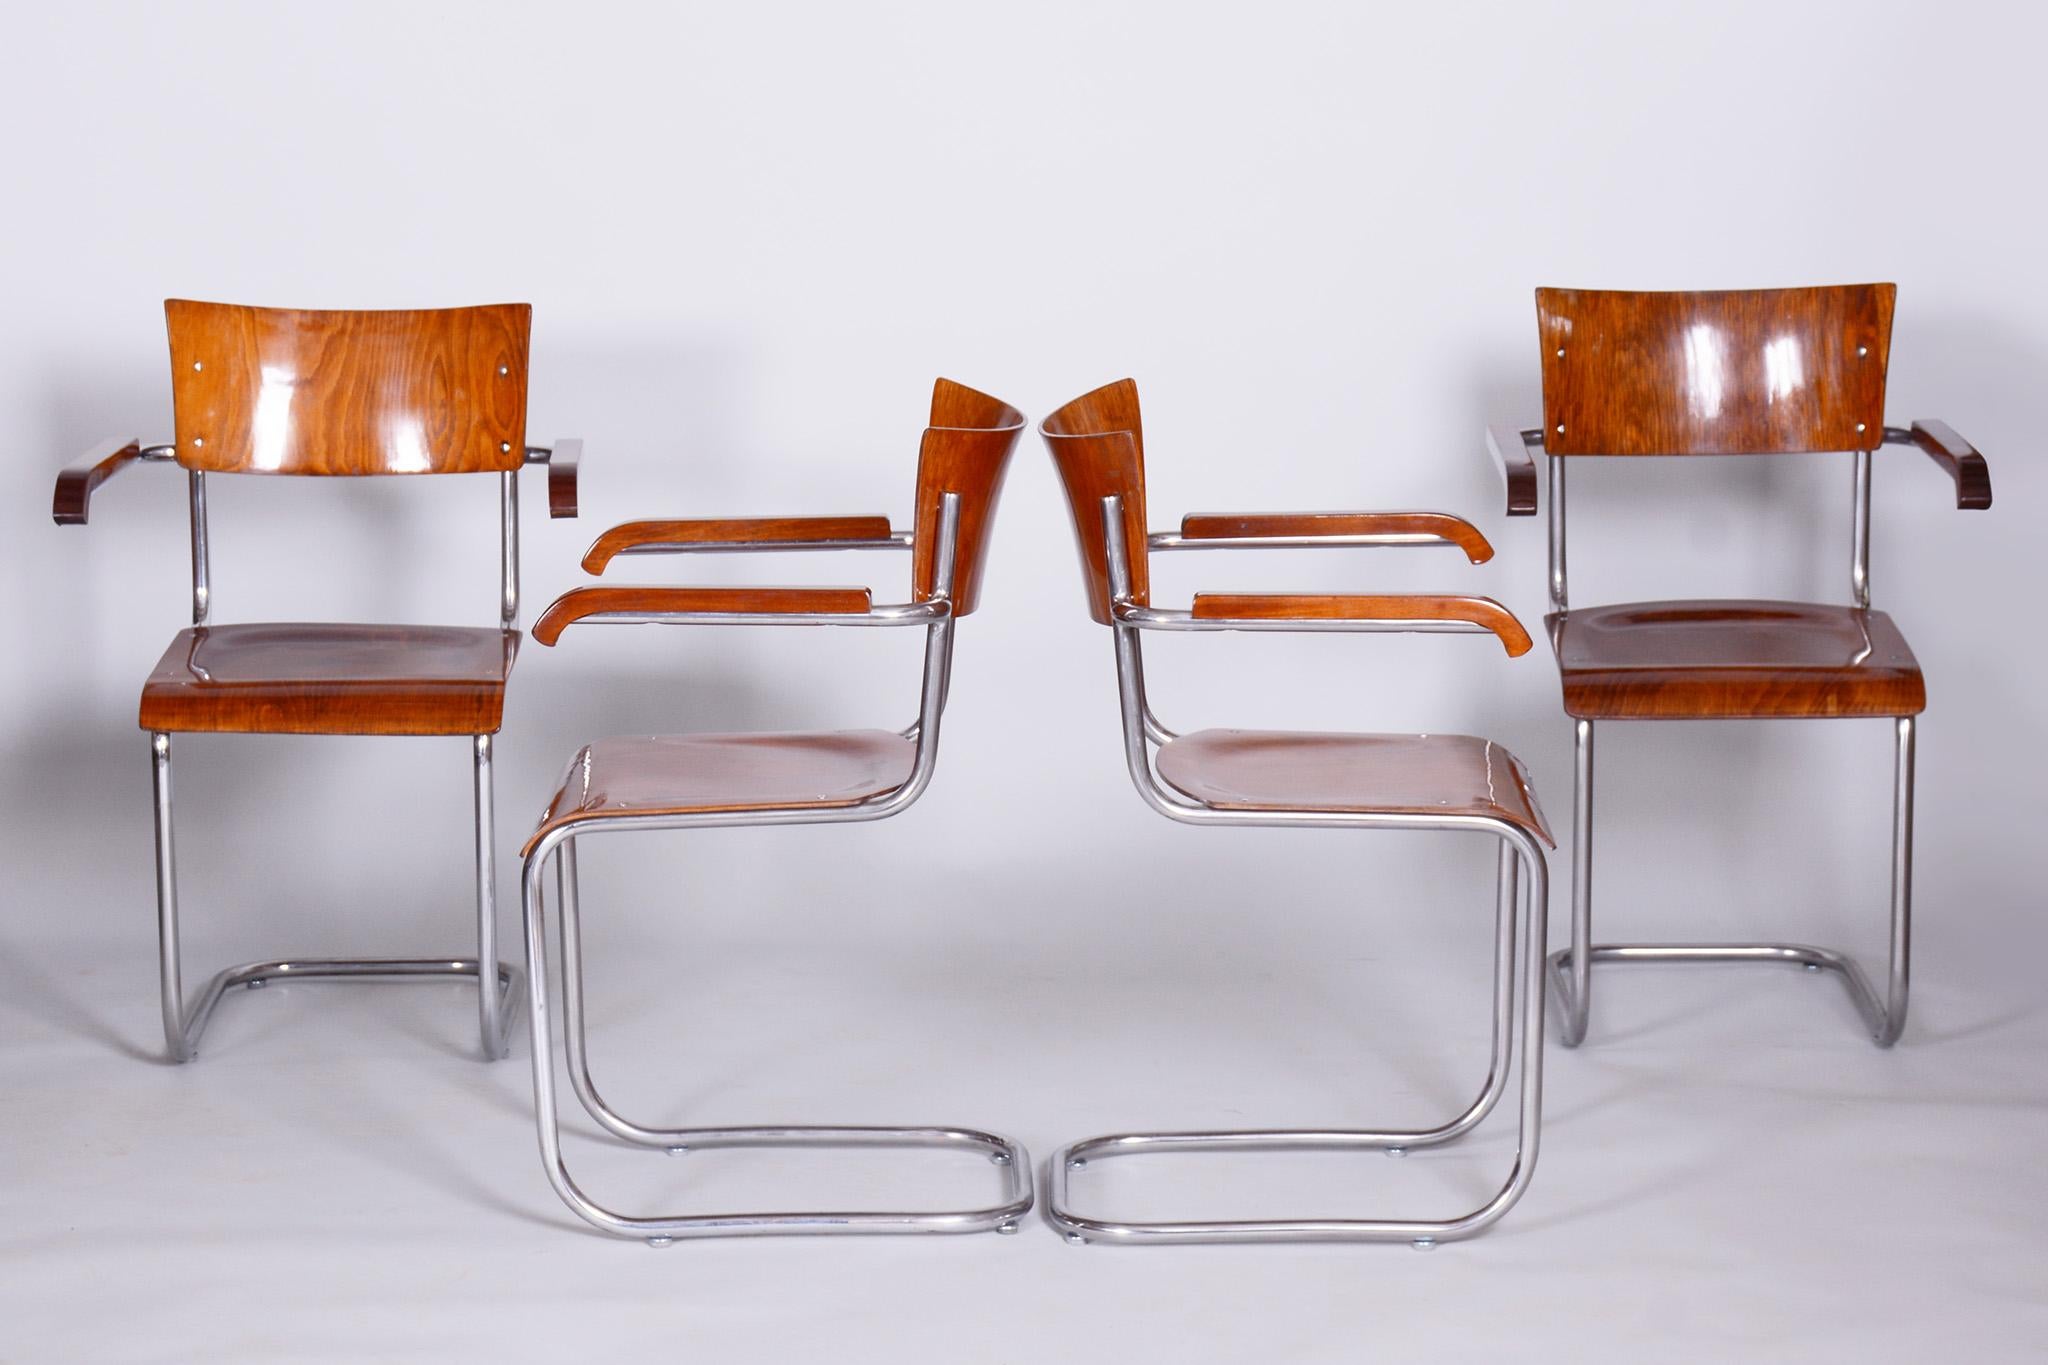 Set of 4 Restored Bauhaus Beech Armchairs Designed by Mart Stam, 1930s, Czechia For Sale 4